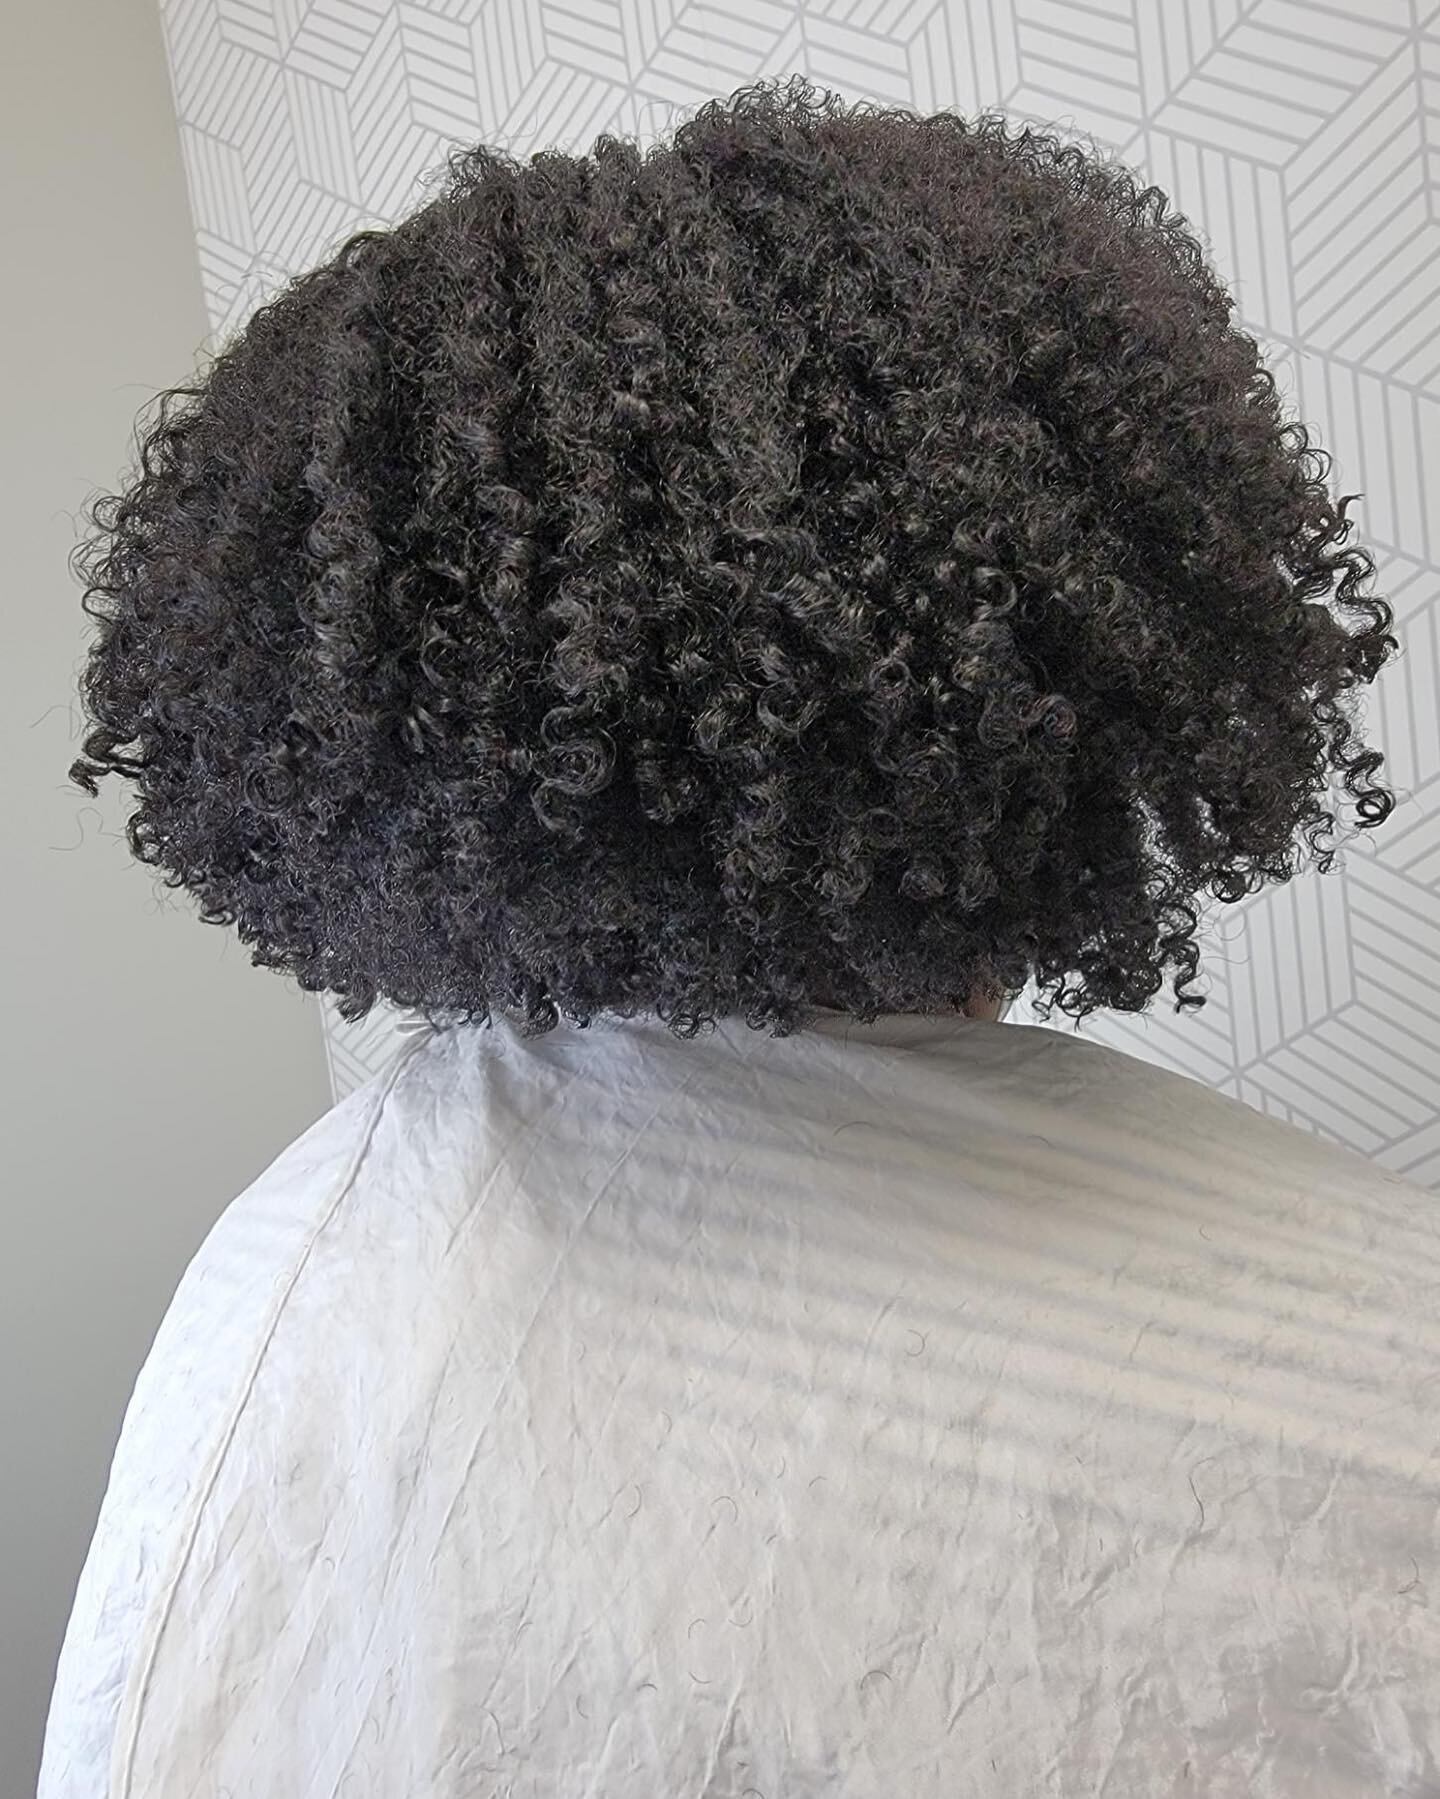 Do you know what you&rsquo;re looking for and expecting to get out of an appointment? 

This client came in for The Works. She had a previous appointment in Atlanta but, she found out about us and decided to give us a try! She knew her hair was not i